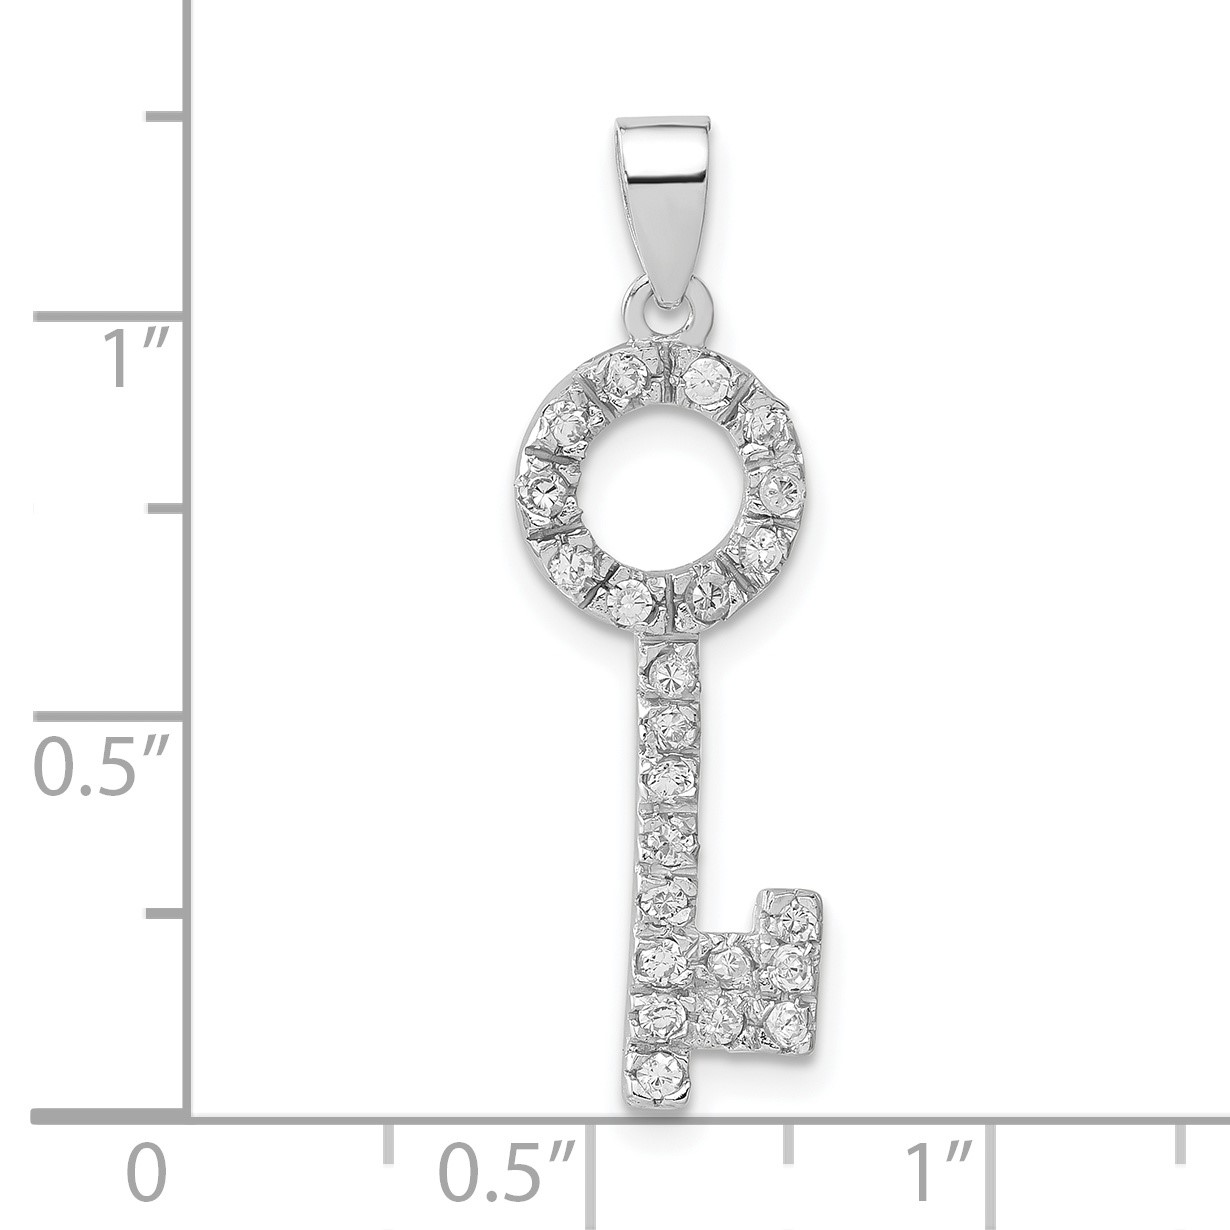 925 Sterling Silver Enameled Cubic Zirconia Cz Octagon Key Pendant Charm Necklace Fine Jewelry Gifts For Women For Her 